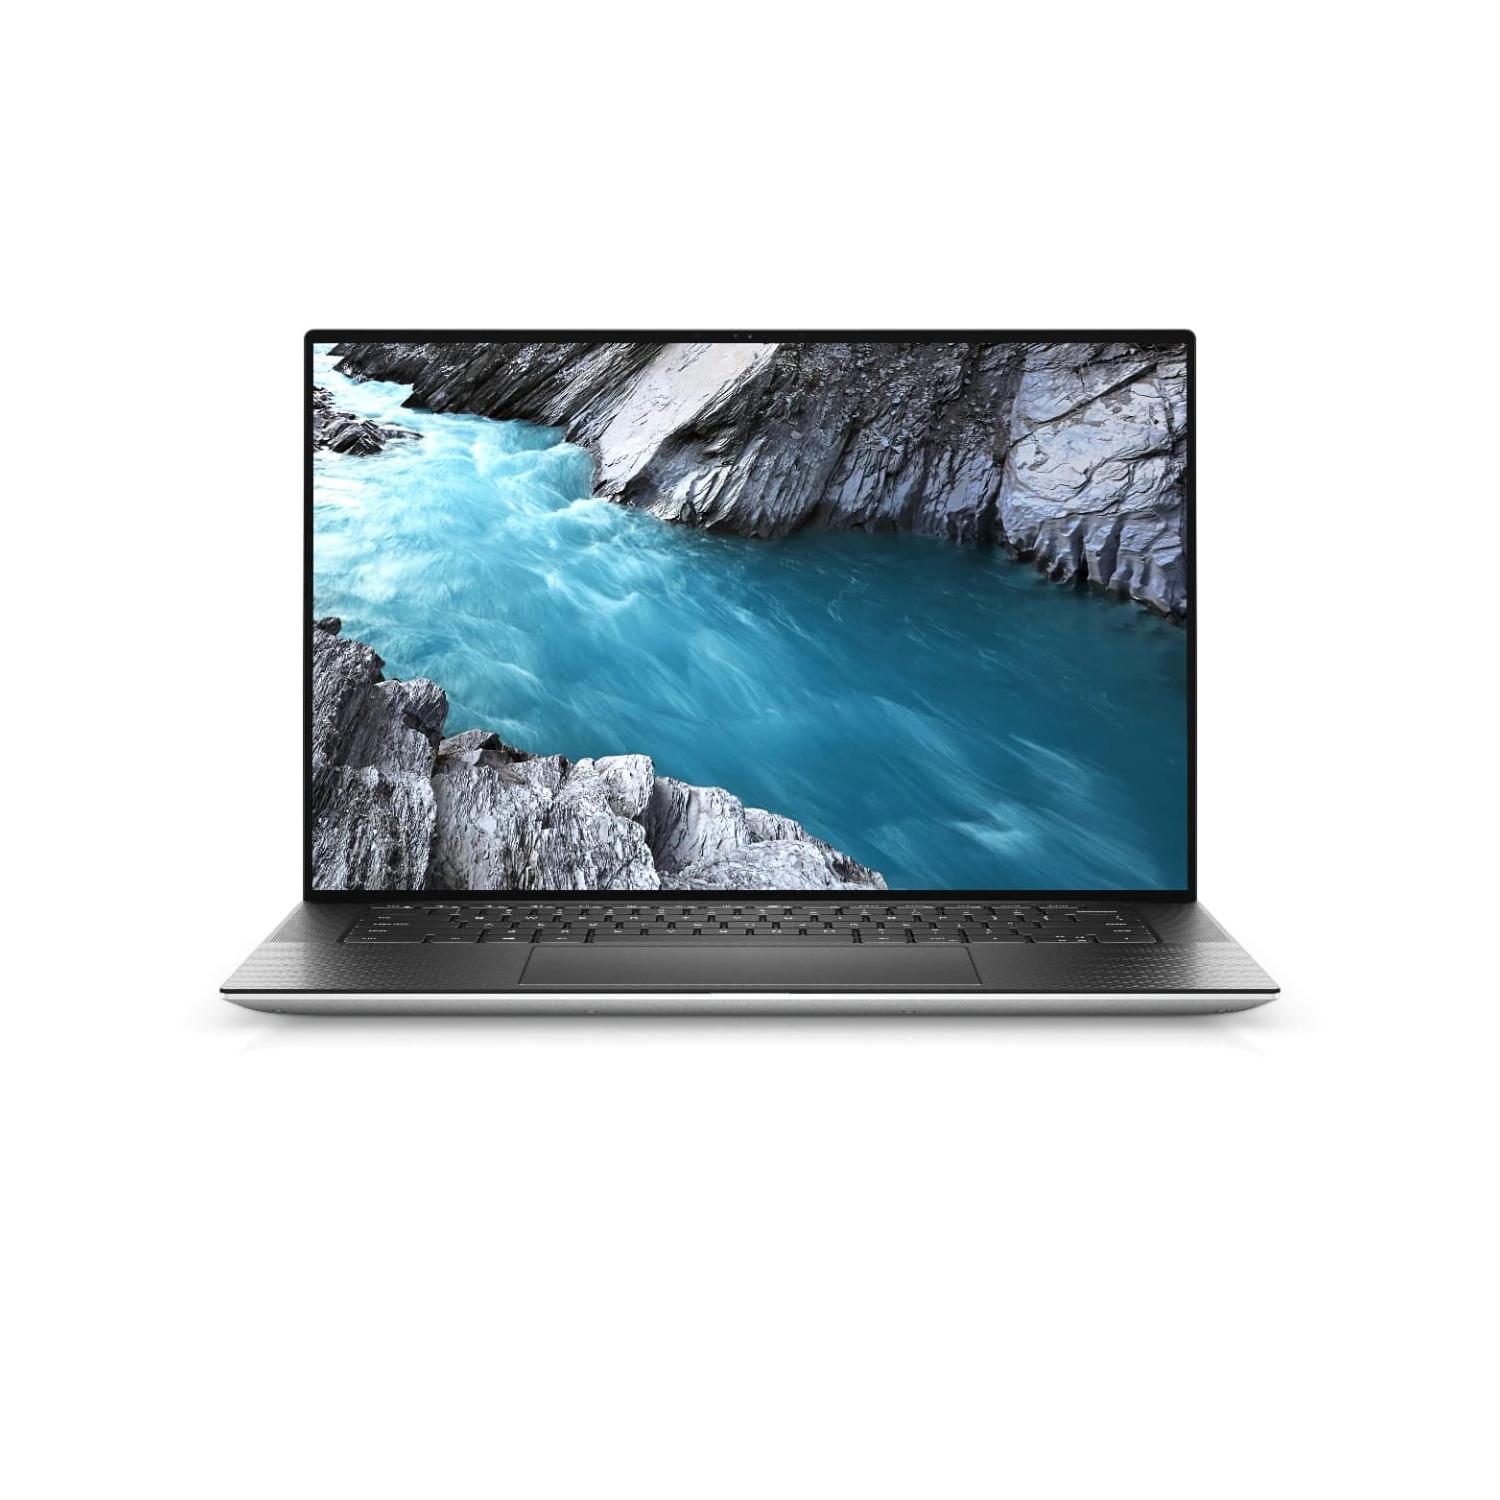 Refurbished (Excellent) - Dell XPS 15 9500 Laptop (2020) | 15" 4K Touch | Core i9 - 2TB SSD - 64GB RAM - 1650 Ti | 8 Cores @ 5.3 GHz - 10th Gen CPU Certified Refurbished